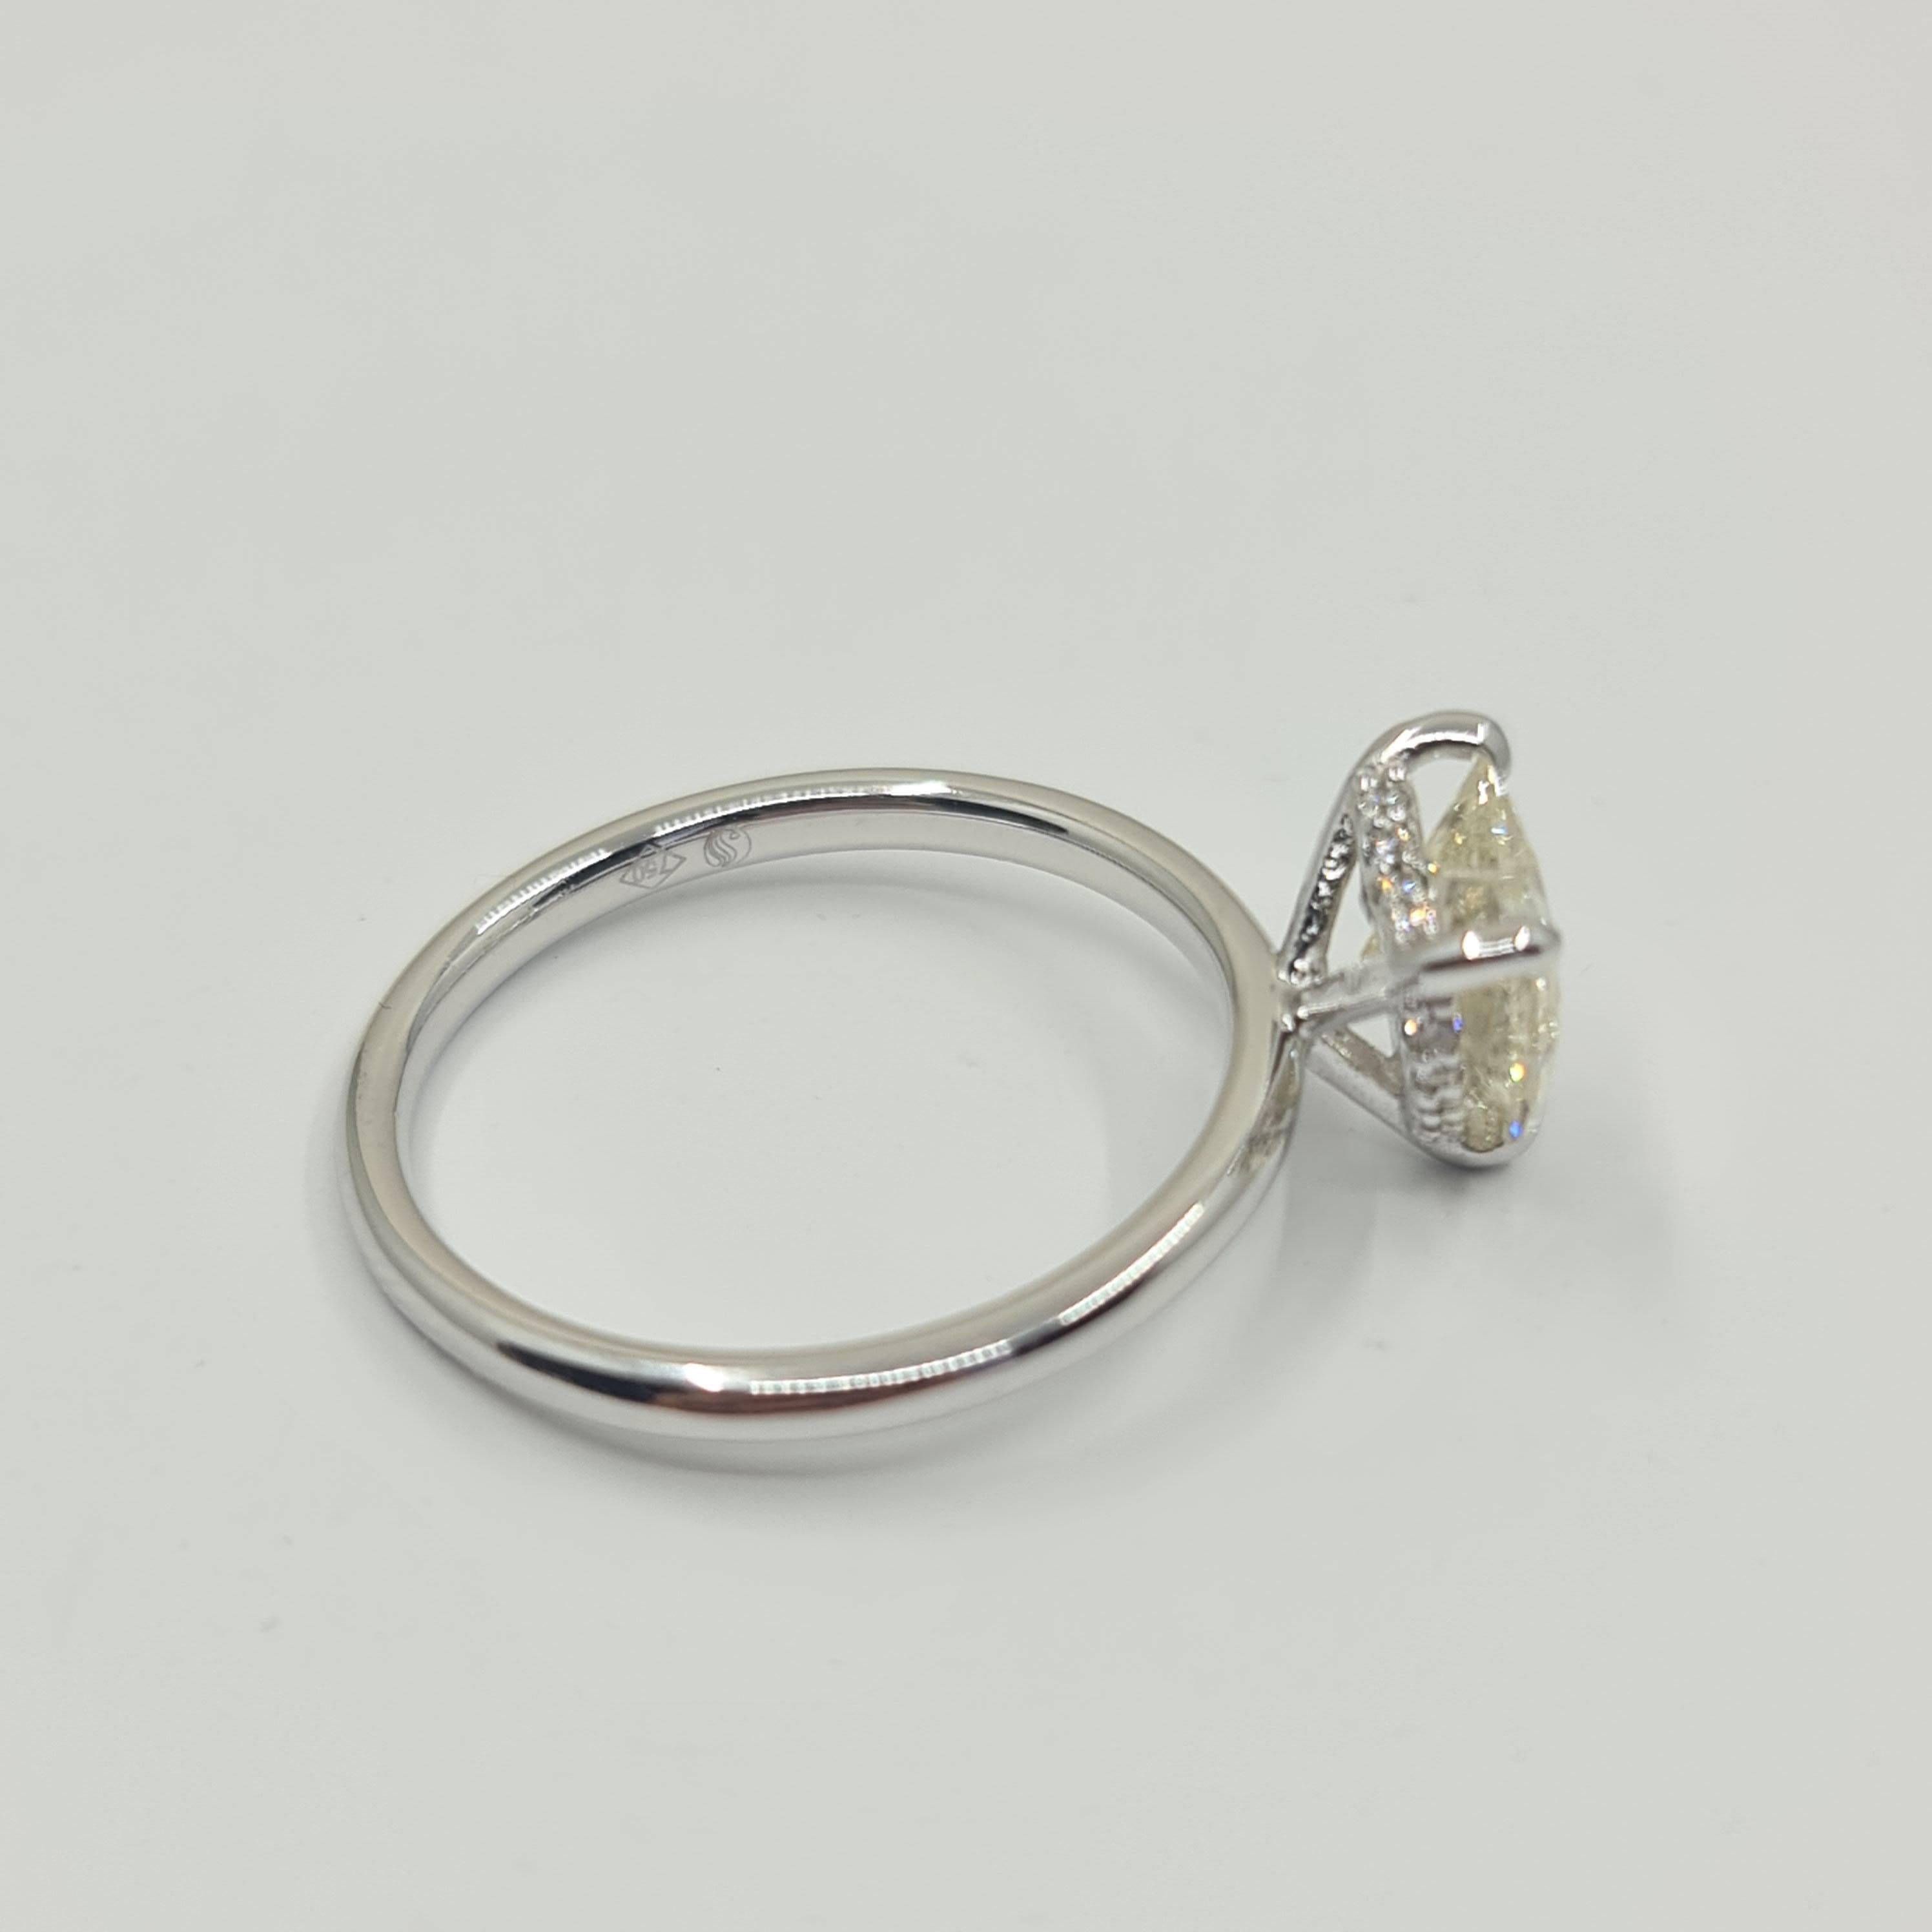 Exquisite GIA Certified 1.60 Carat Heart Diamond Ring with 0.07 Carat Halo G/VS For Sale 3